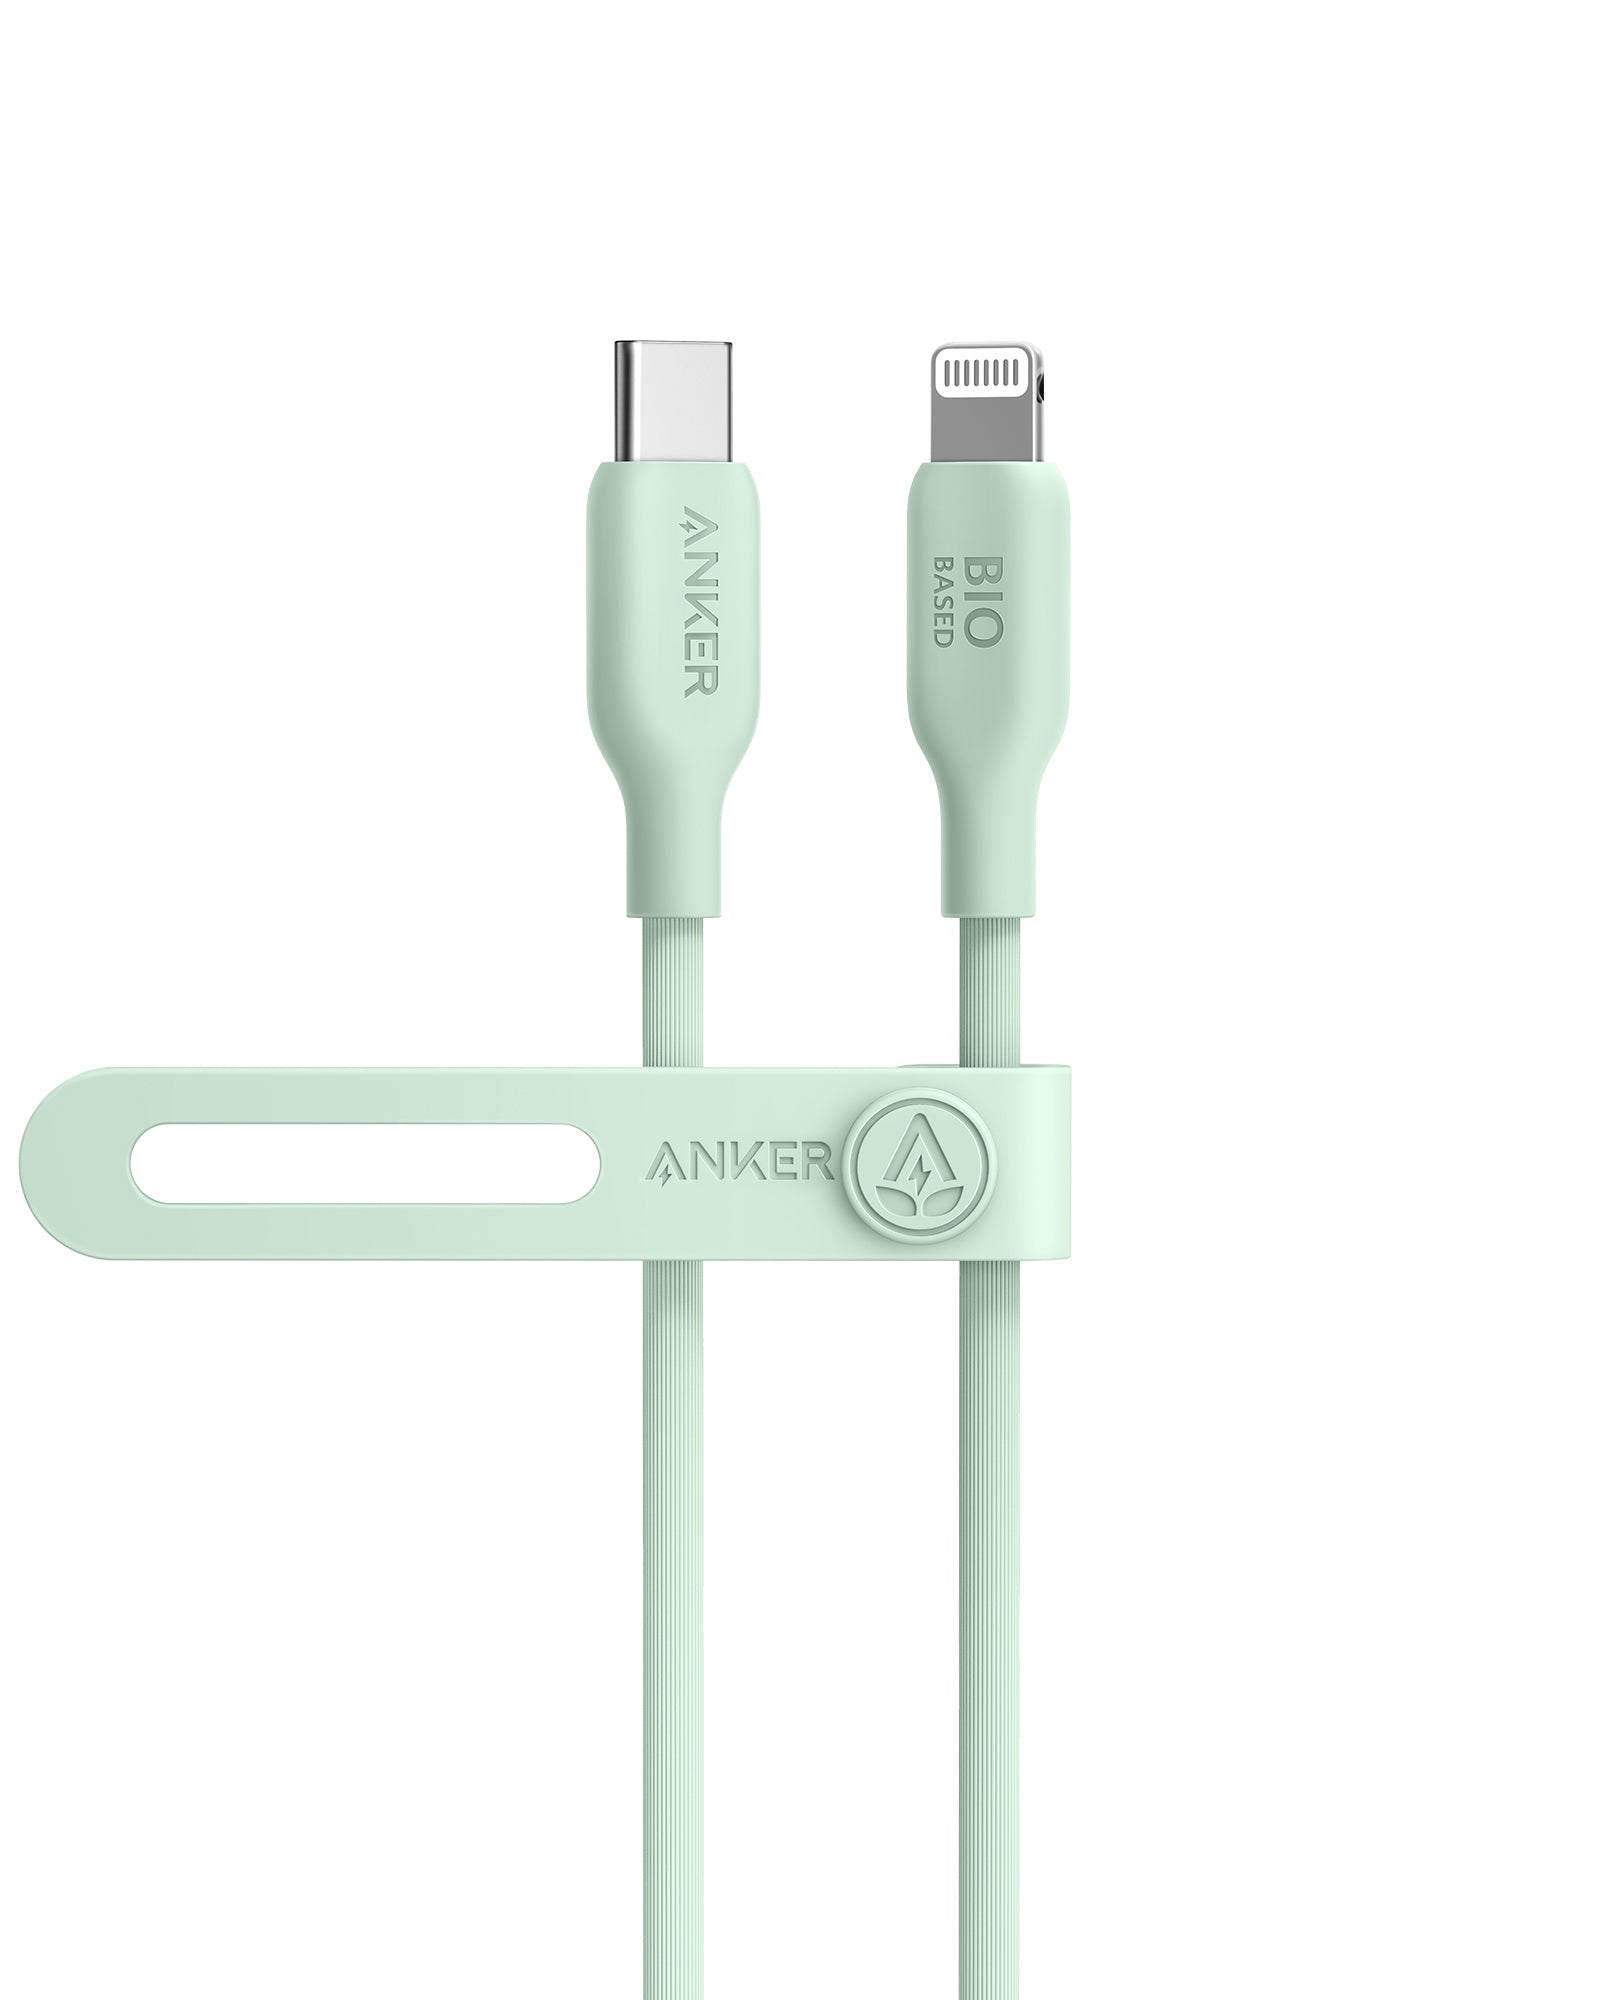 Photos - Cable (video, audio, USB) ANKER 541 USB-C to Lightning Cable  3ft / Natural Green A80A106 (Bio-Based)